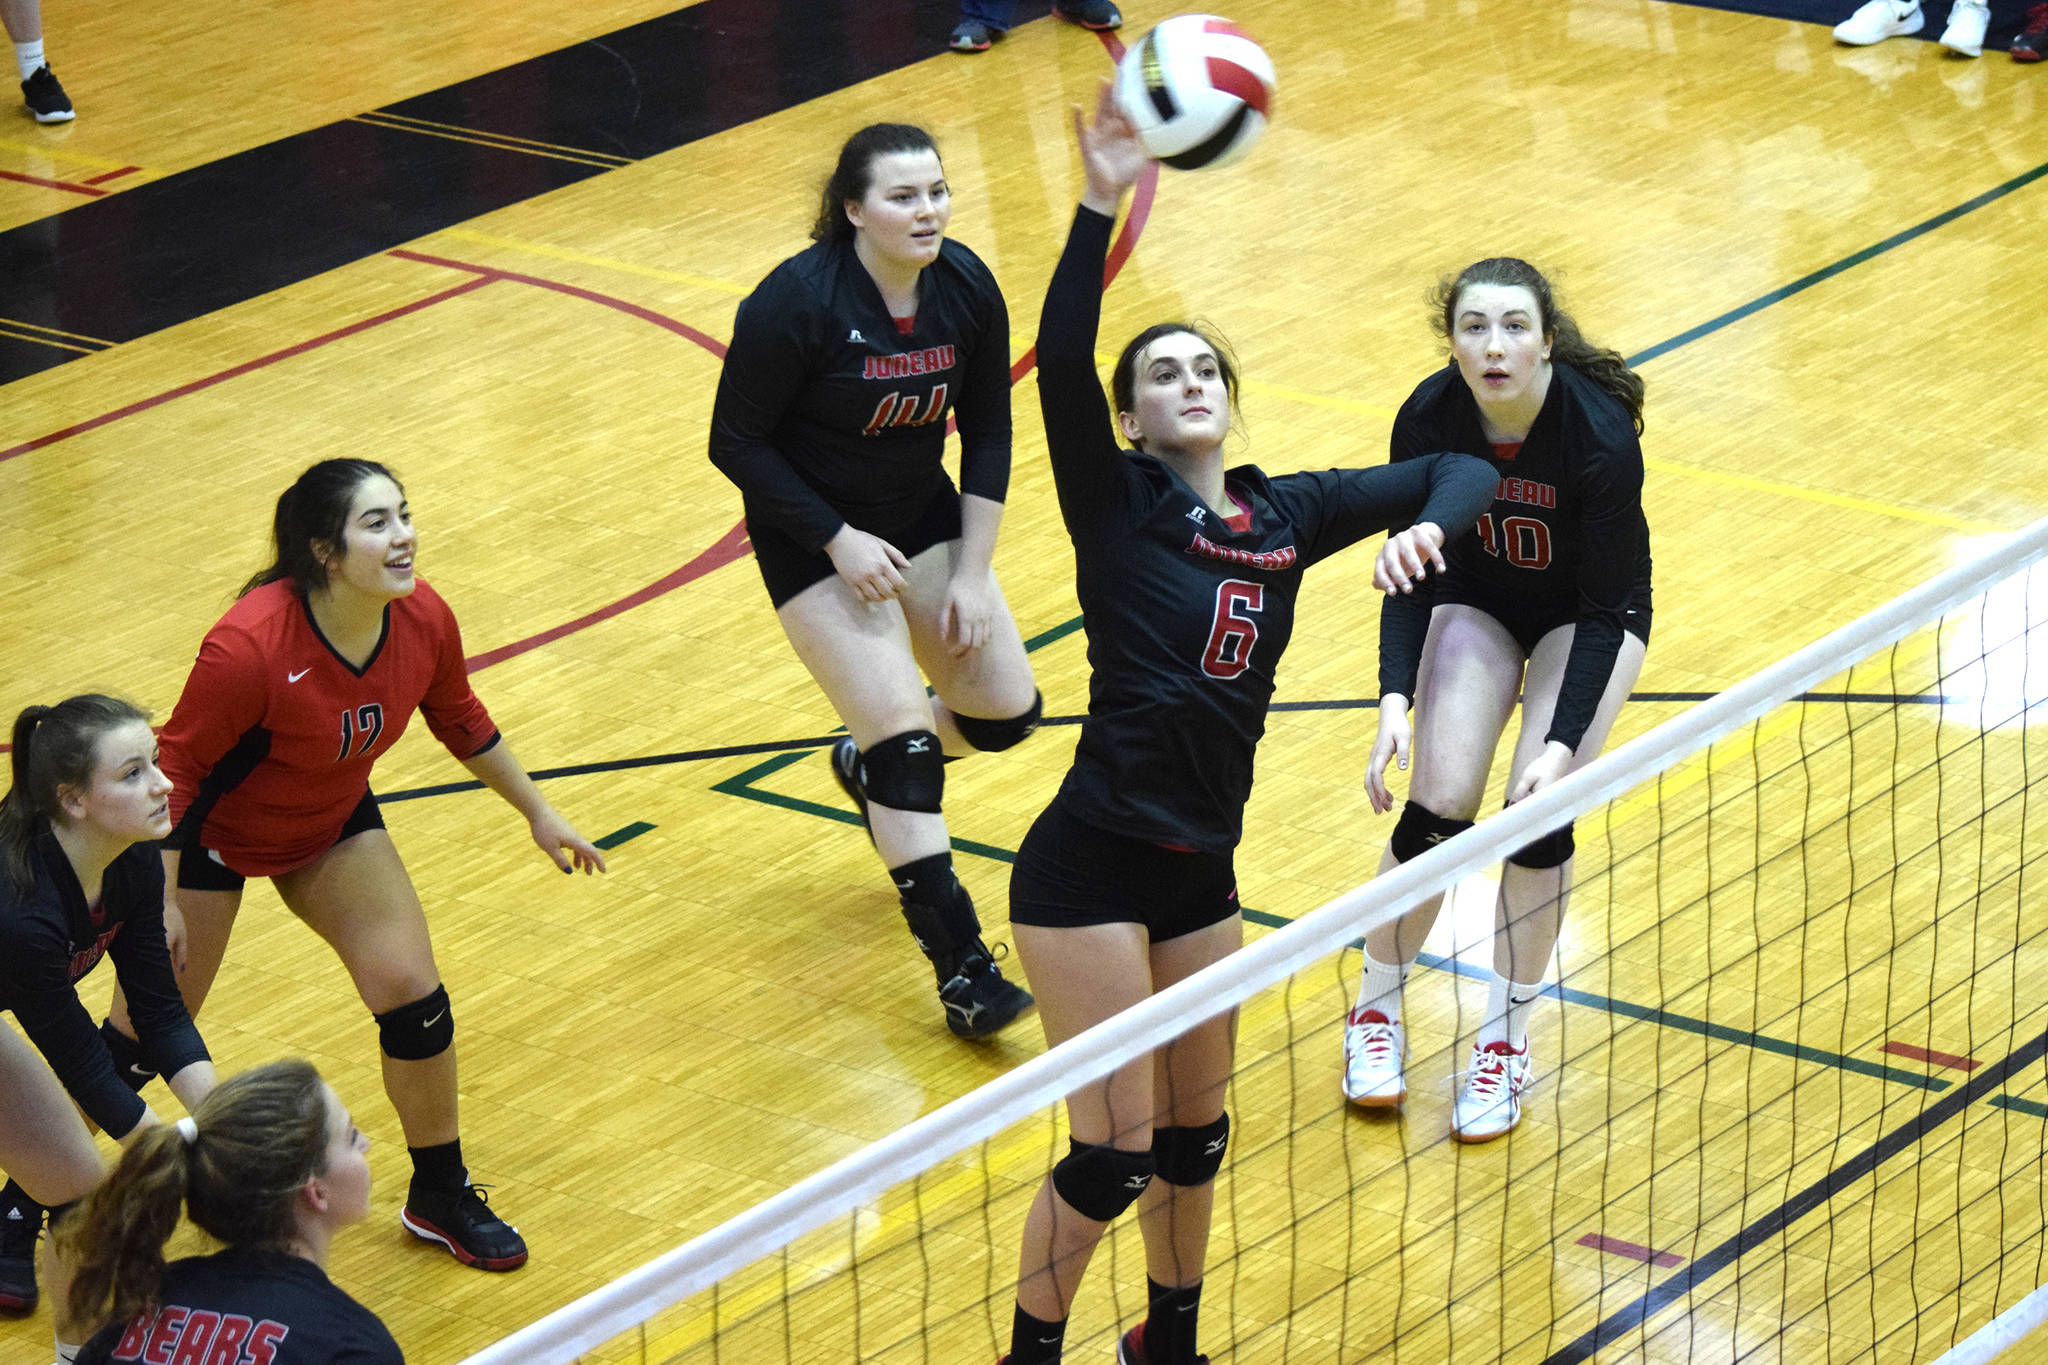 Juneau volleyball dominant to begin JIVE tourney